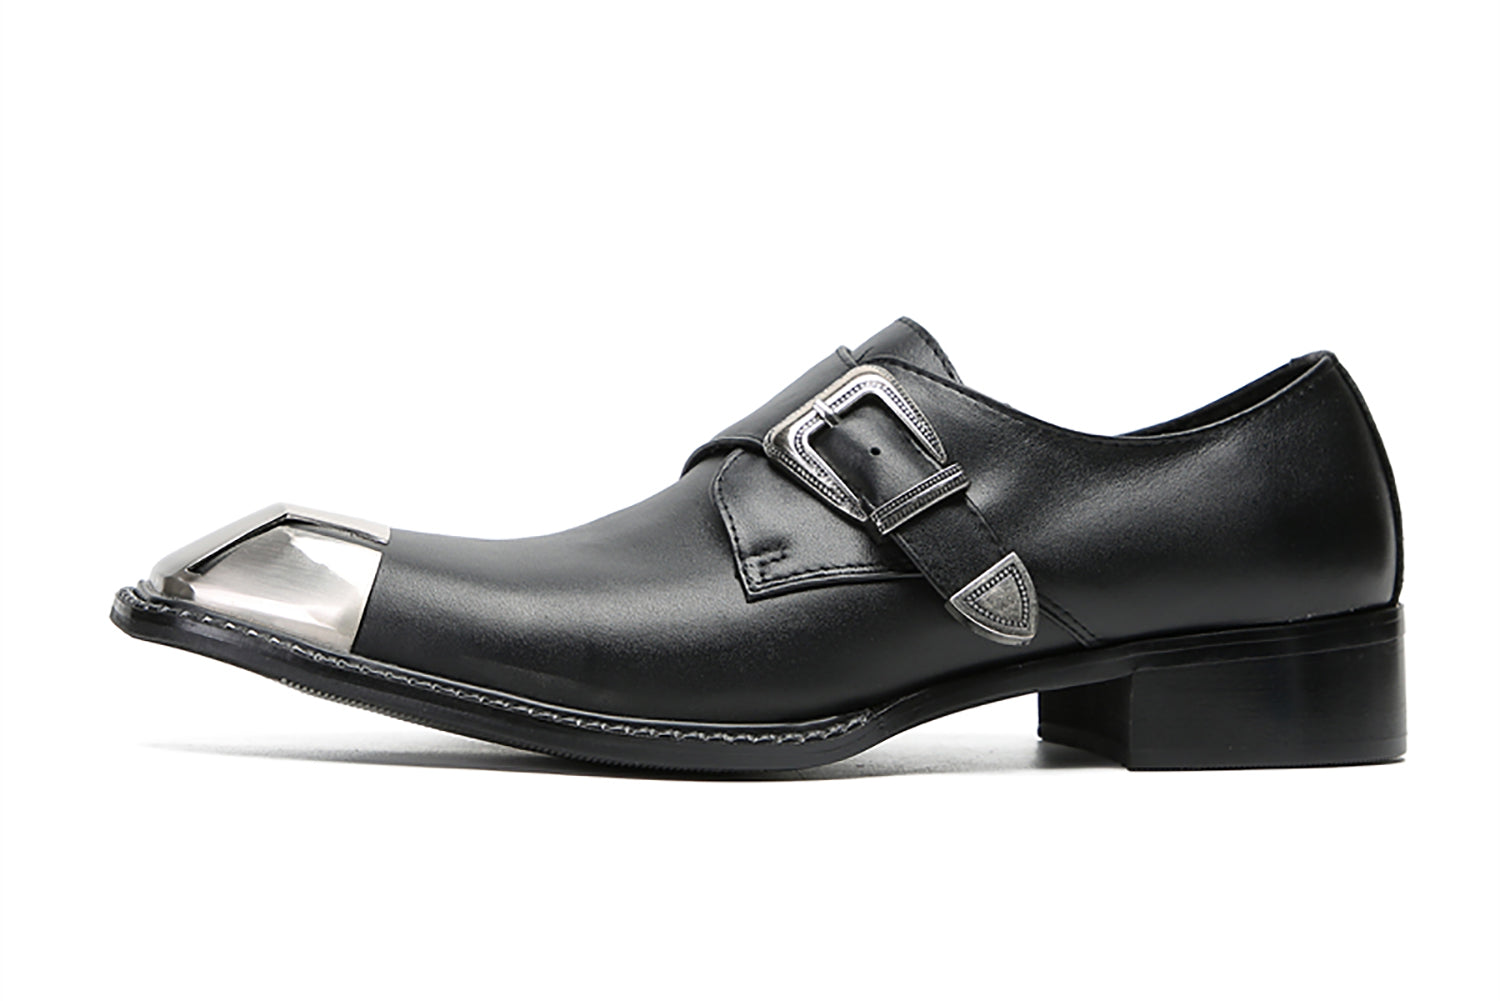 Men's Casual Metal-Square Toe Buckle Western Loafers